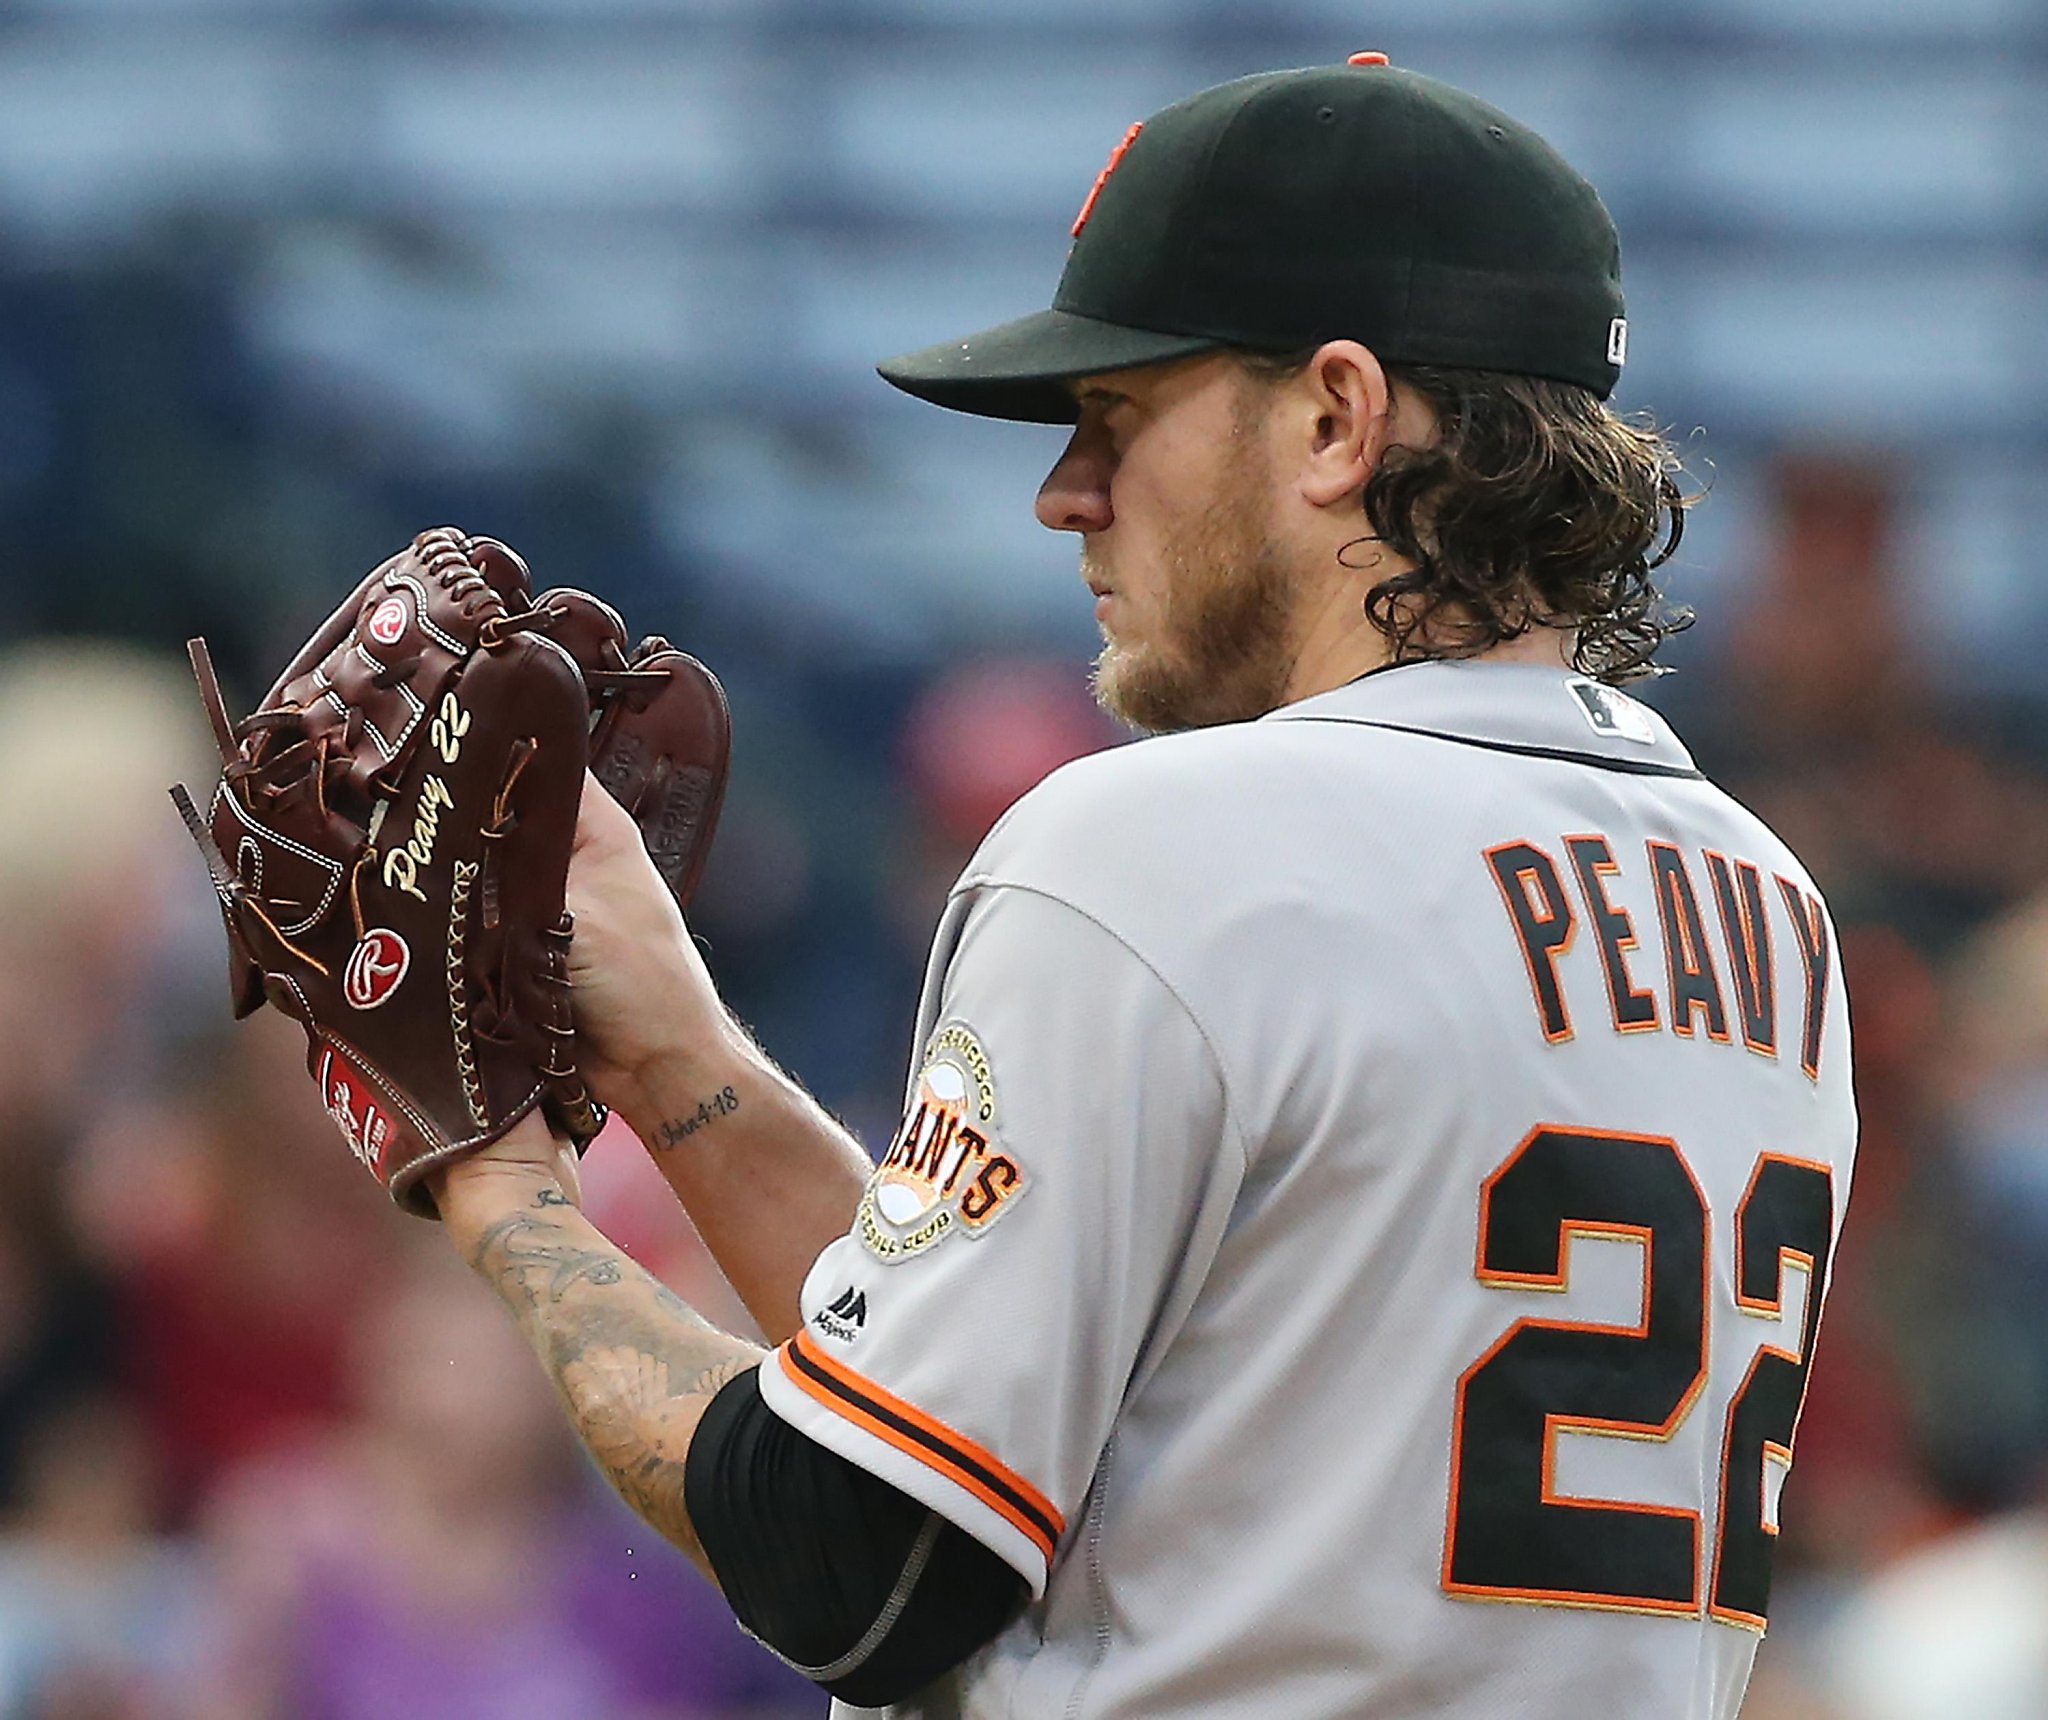 Giants' pitcher Jake Peavy hasn't allowed cruelty by others to